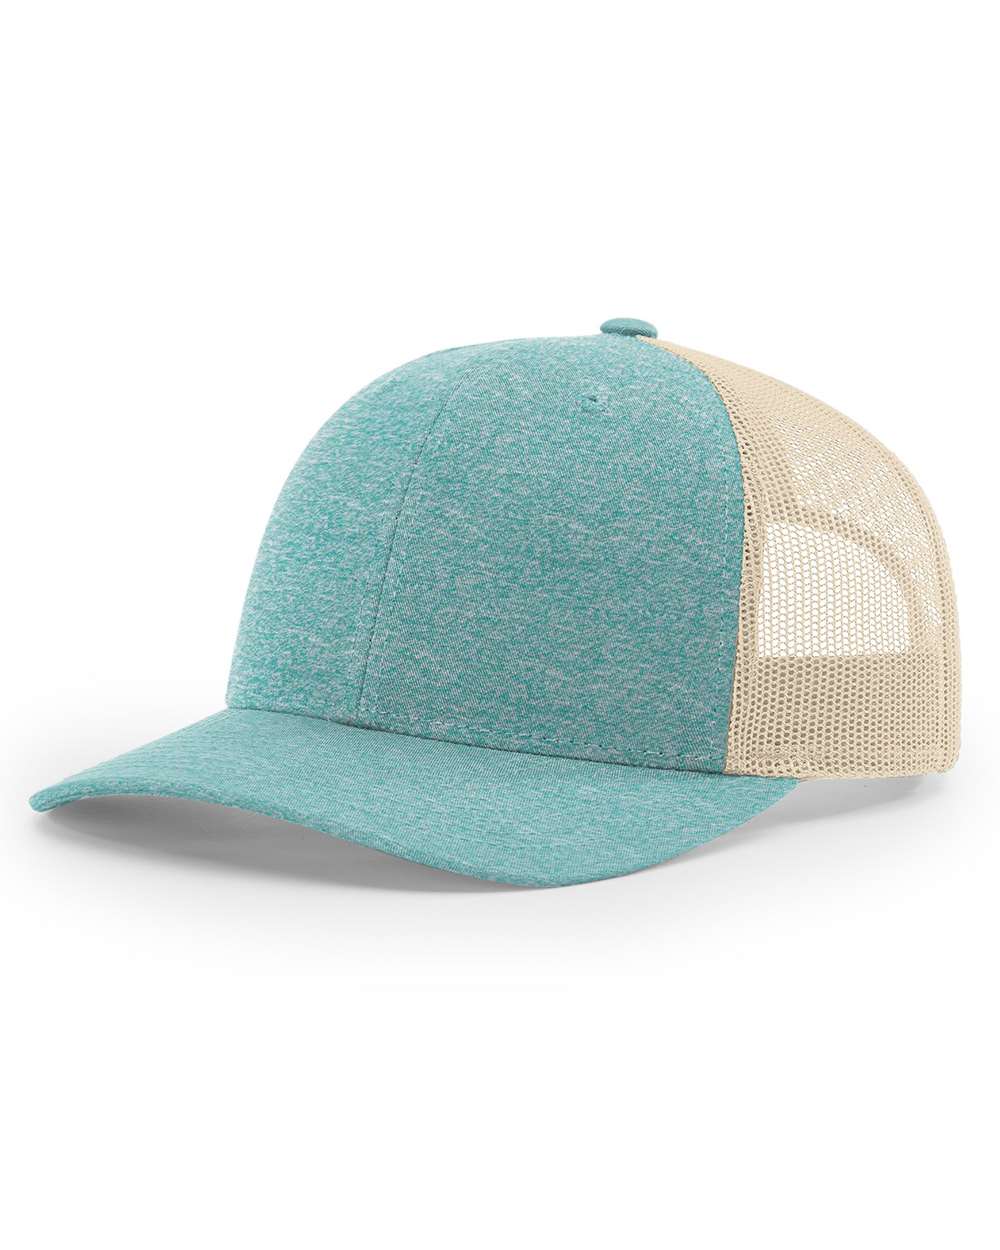 click to view Green Teal Heather/ Birch